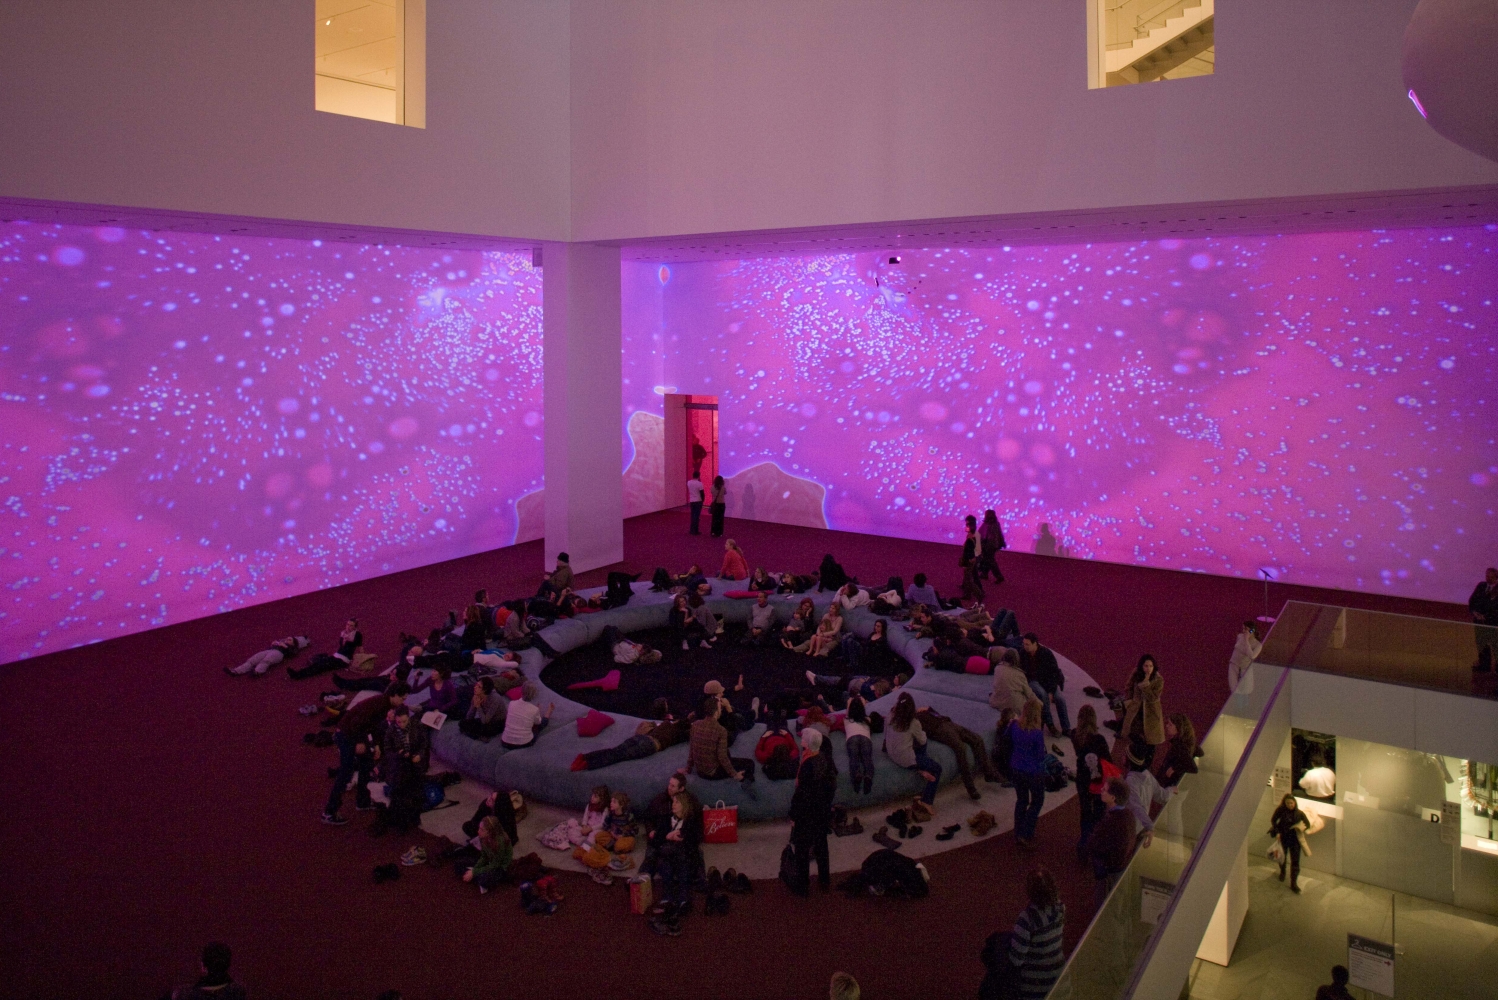 Pipilotti Rist
Pour Your Body Out (7354 Cubic Meters), 2008
Multichannel video and sound installation, color, with circular seating element and carpet
Duartion: 16 minutes, 2 seconds
Installation view,&amp;nbsp;Museum of Modern Art, New York
November&amp;nbsp;19, 2008 &amp;ndash; February 2, 2009
Photo:&amp;nbsp;Thomas Griesel